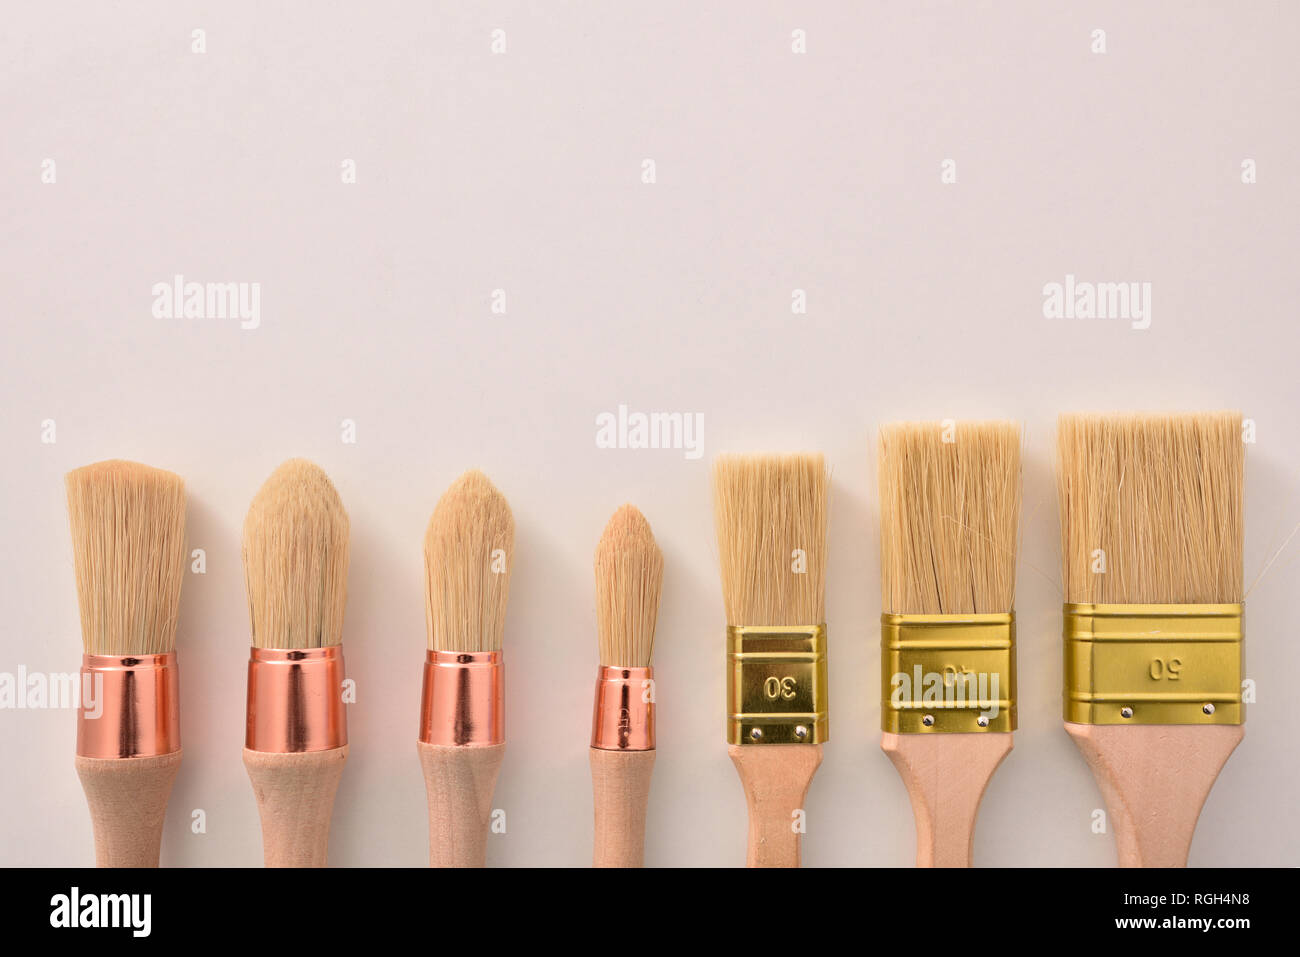 Set of paintbrushes for house painter of various sizes and shapes aligned on white table. Horizontal composition Stock Photo